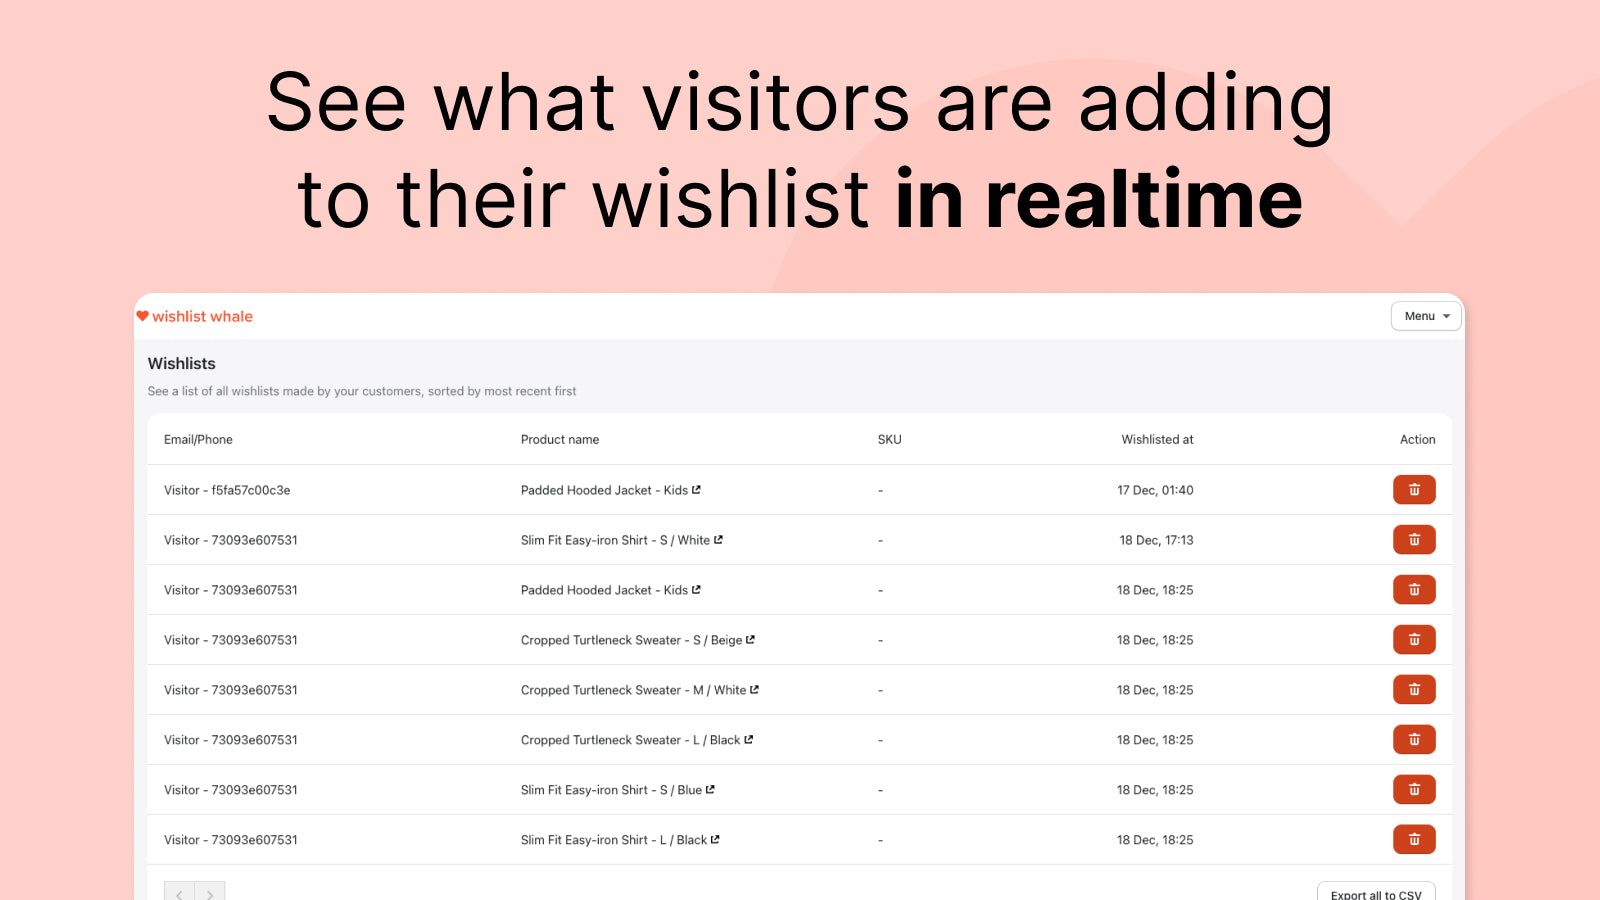 See what visitors are adding to their wishlist in realtime